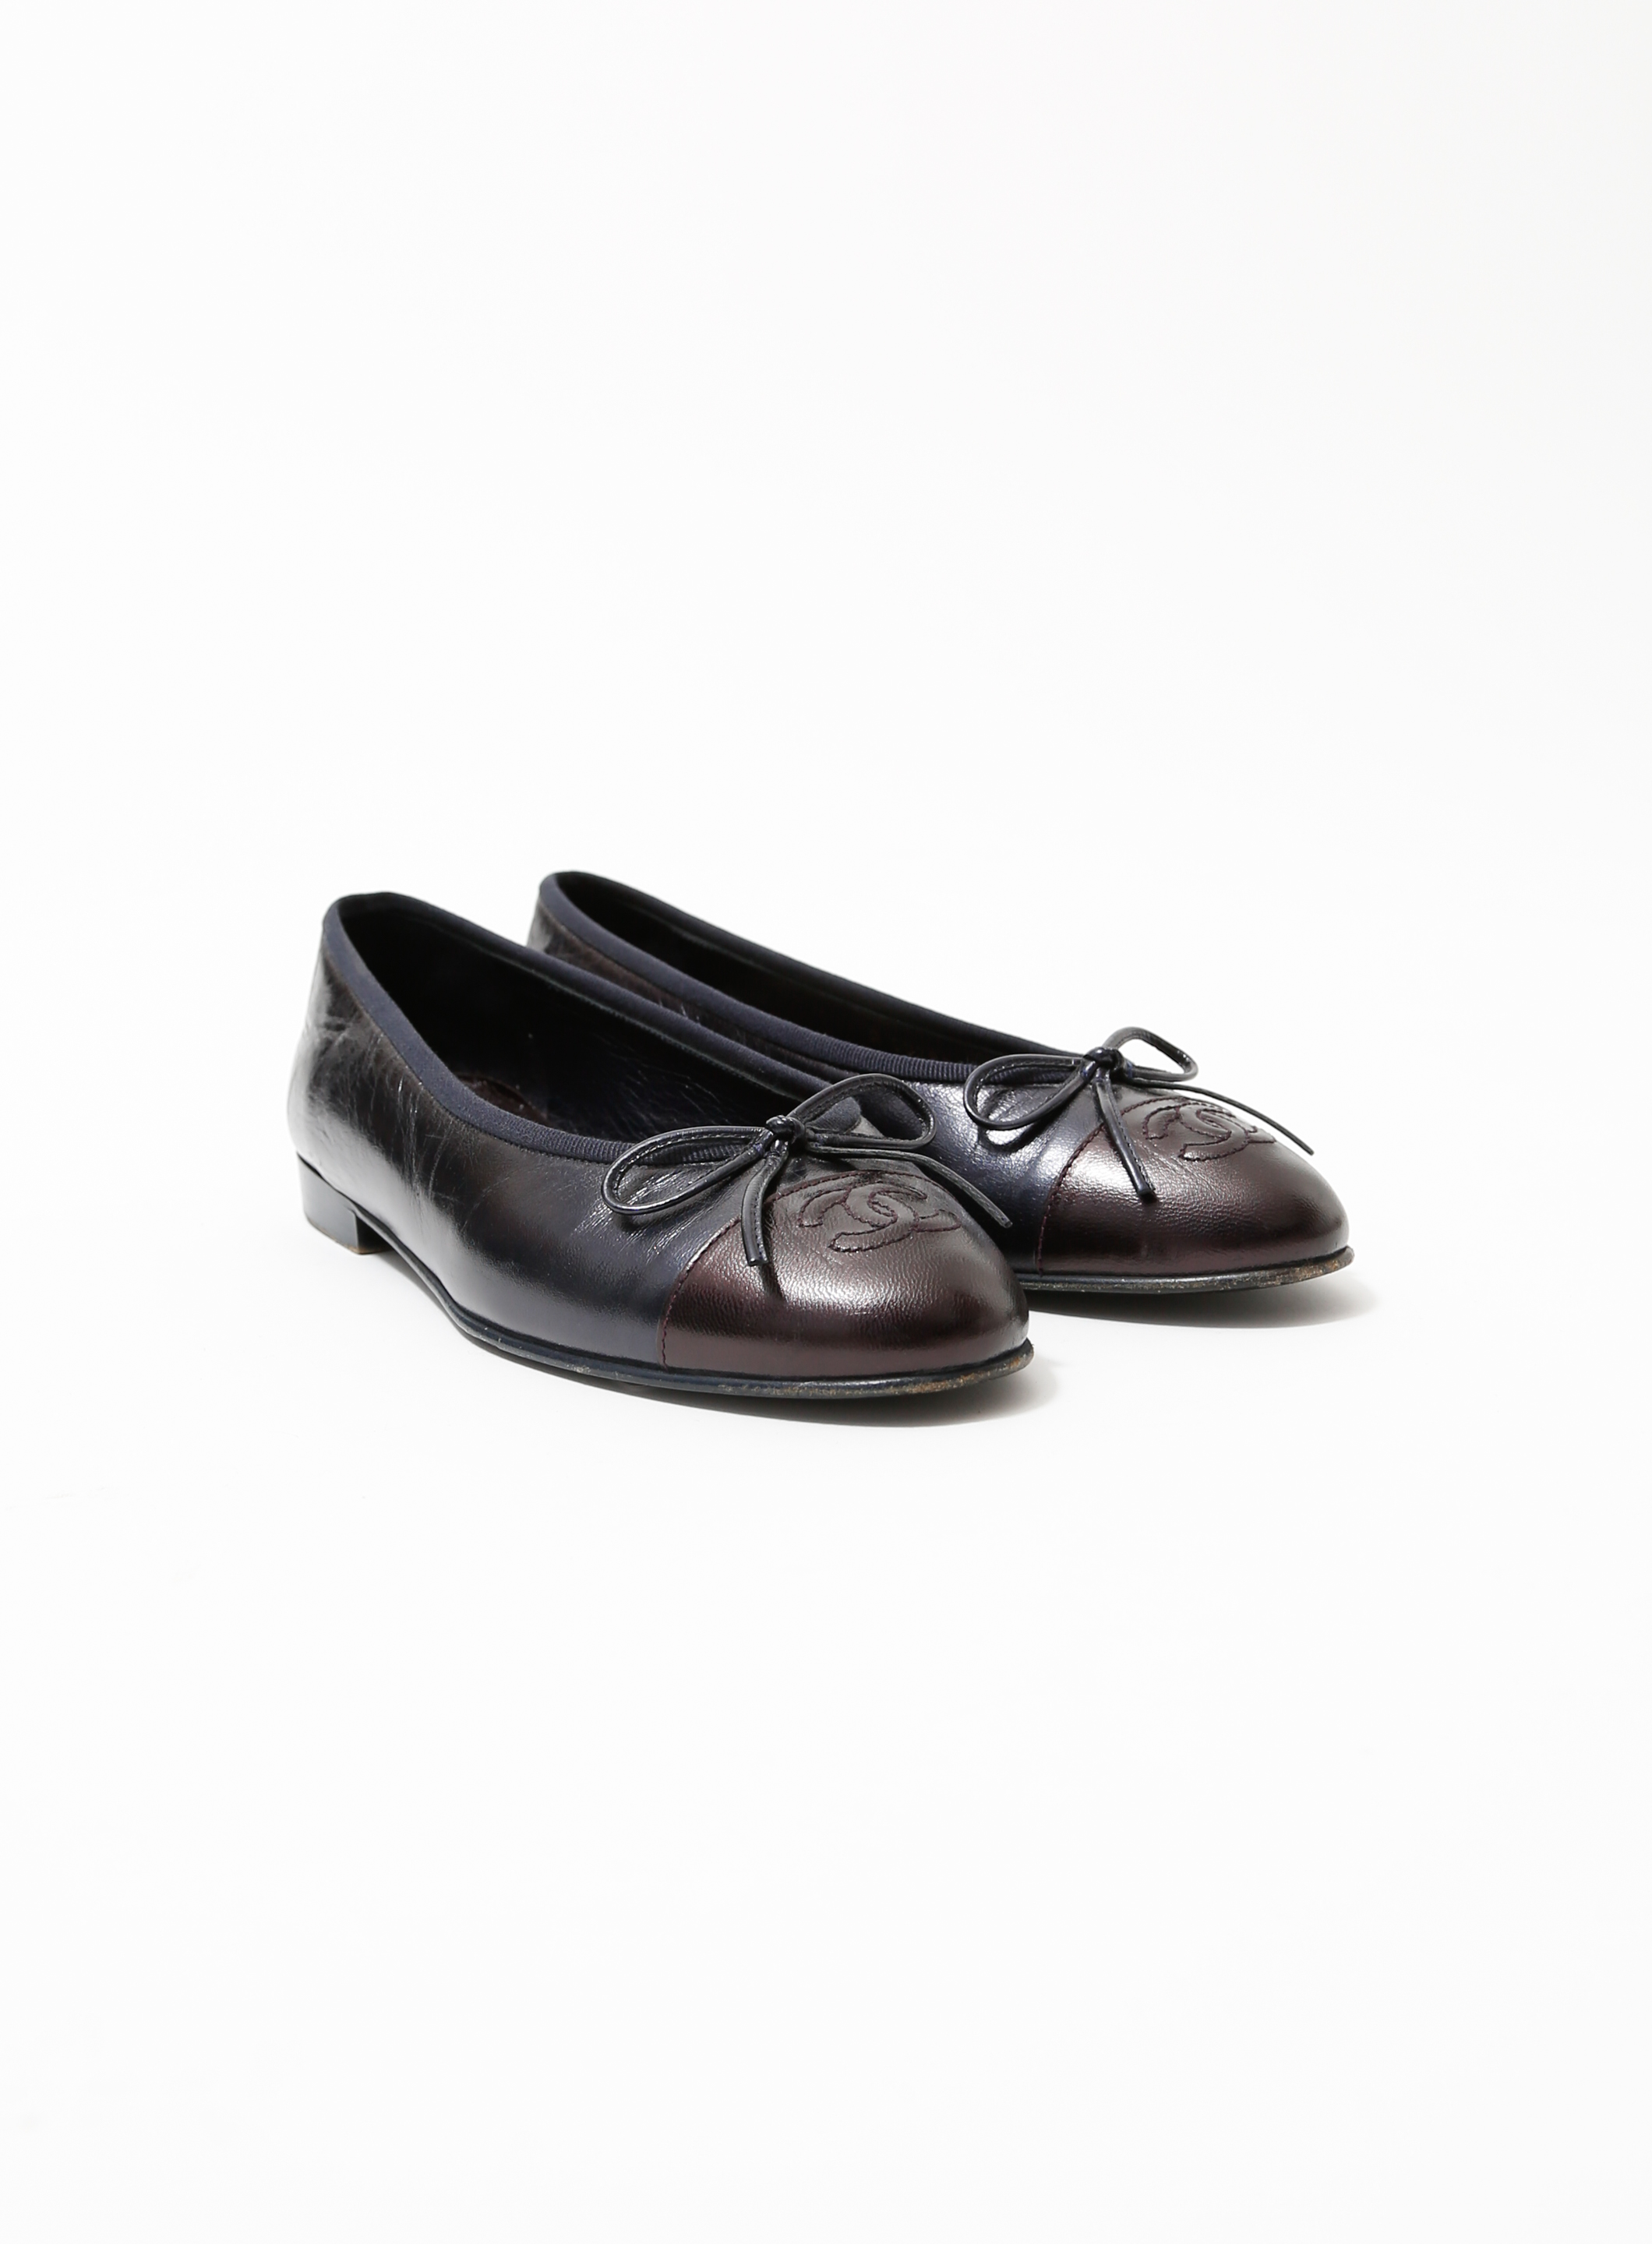 Classic Two Tone Leather Ballerinas, Authentic & Vintage